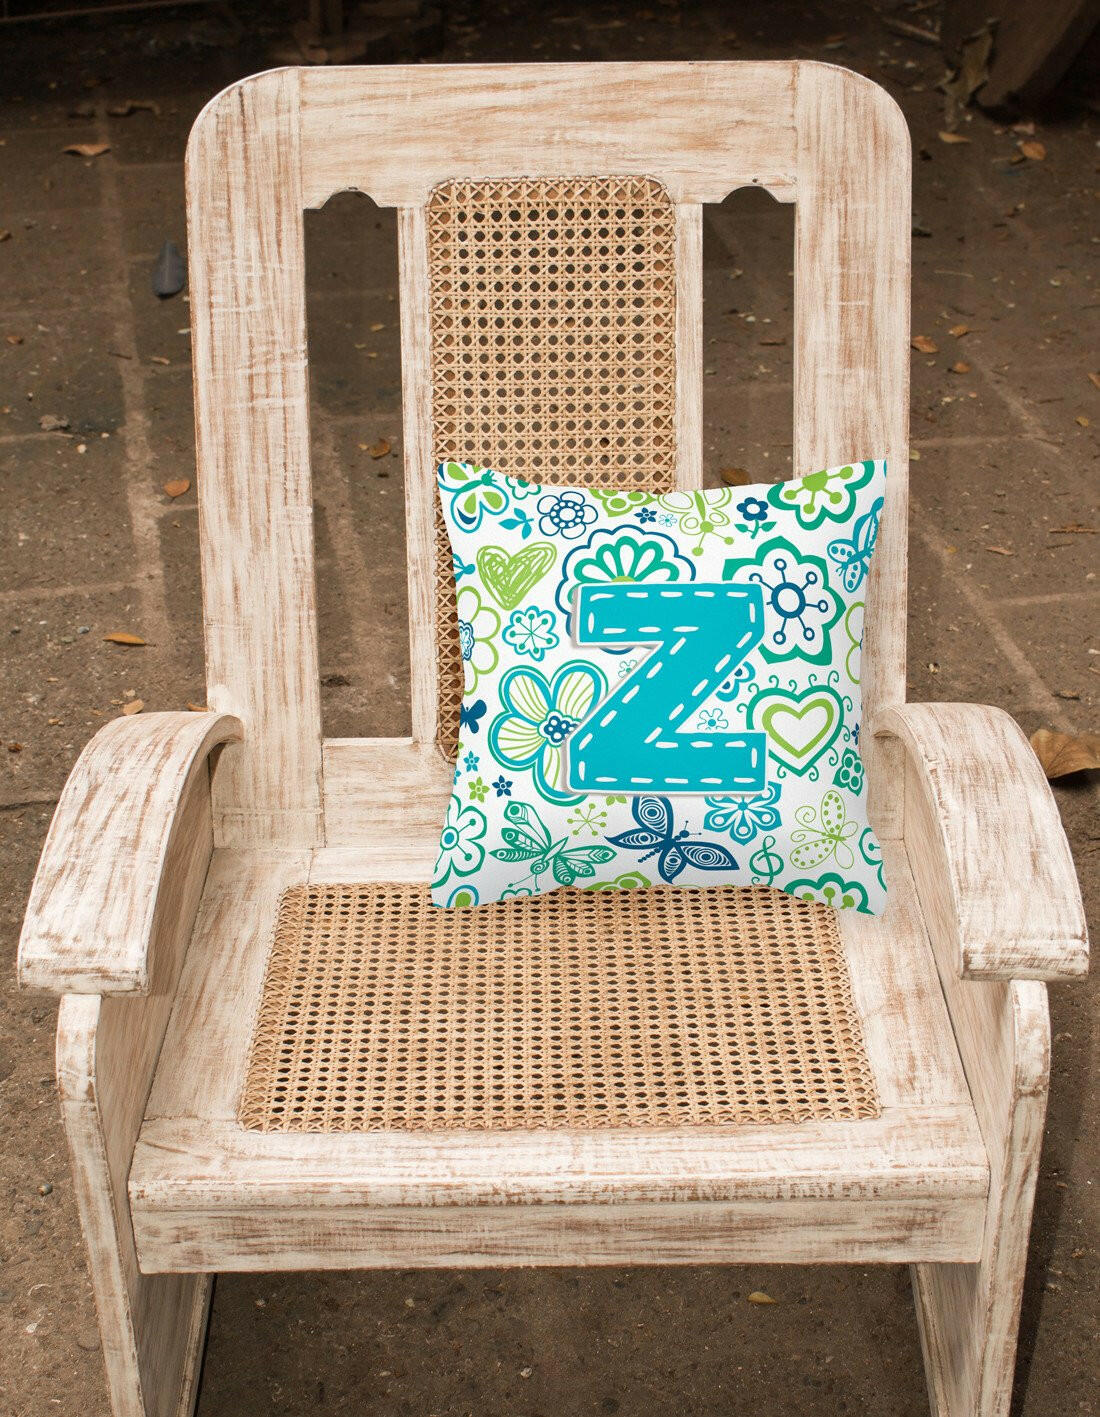 Letter Z Flowers and Butterflies Teal Blue Canvas Fabric Decorative Pillow CJ2006-ZPW1414 by Caroline's Treasures